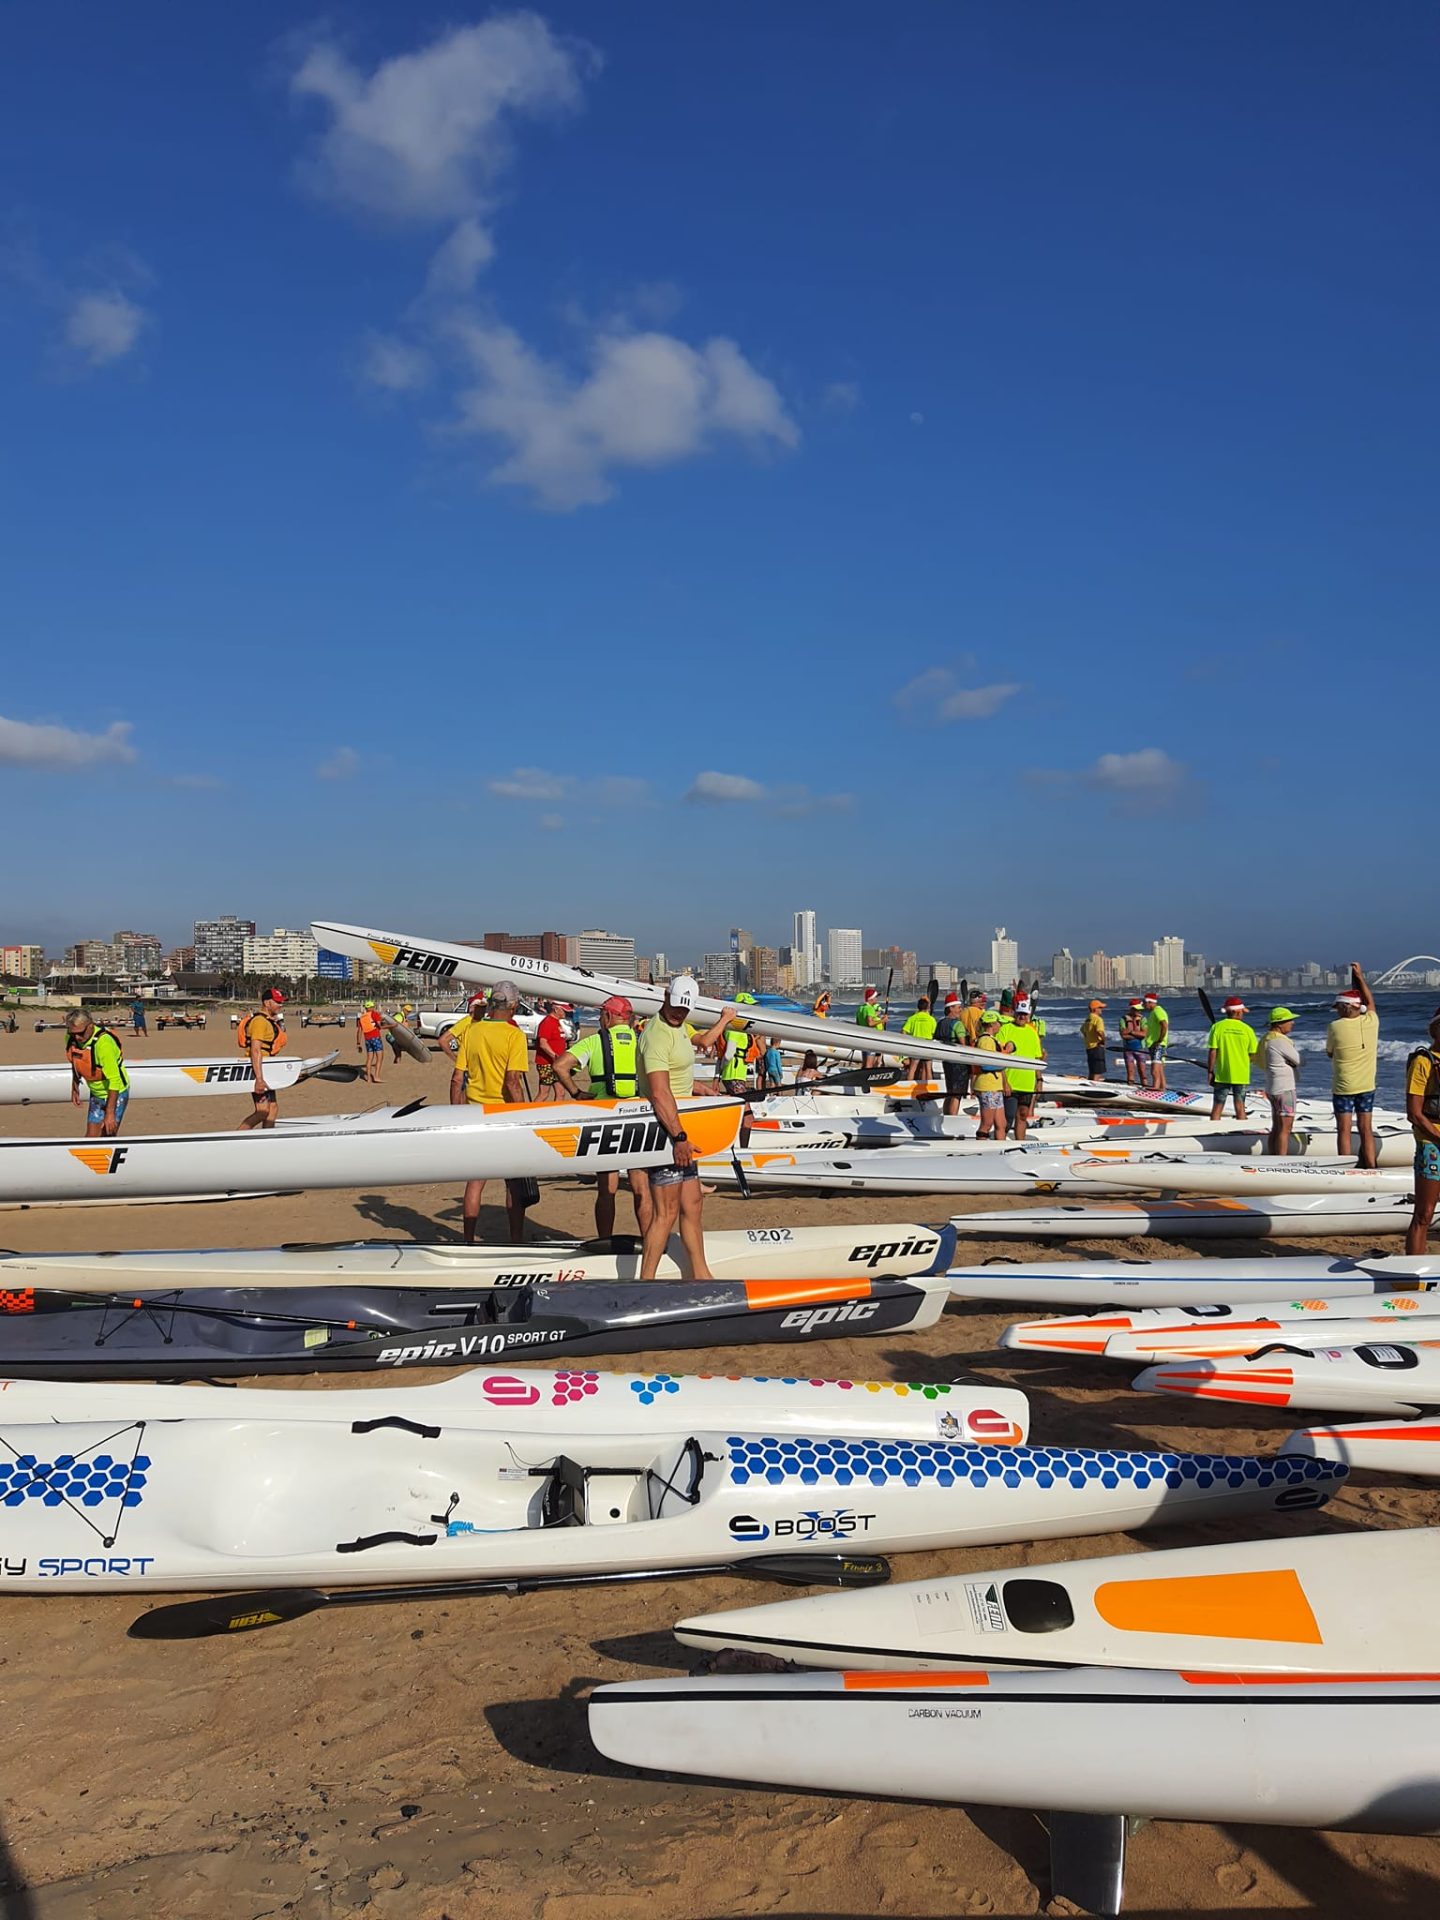 Global Paddling Event Unites Thousands in Support of South African's Battle Against Cancer